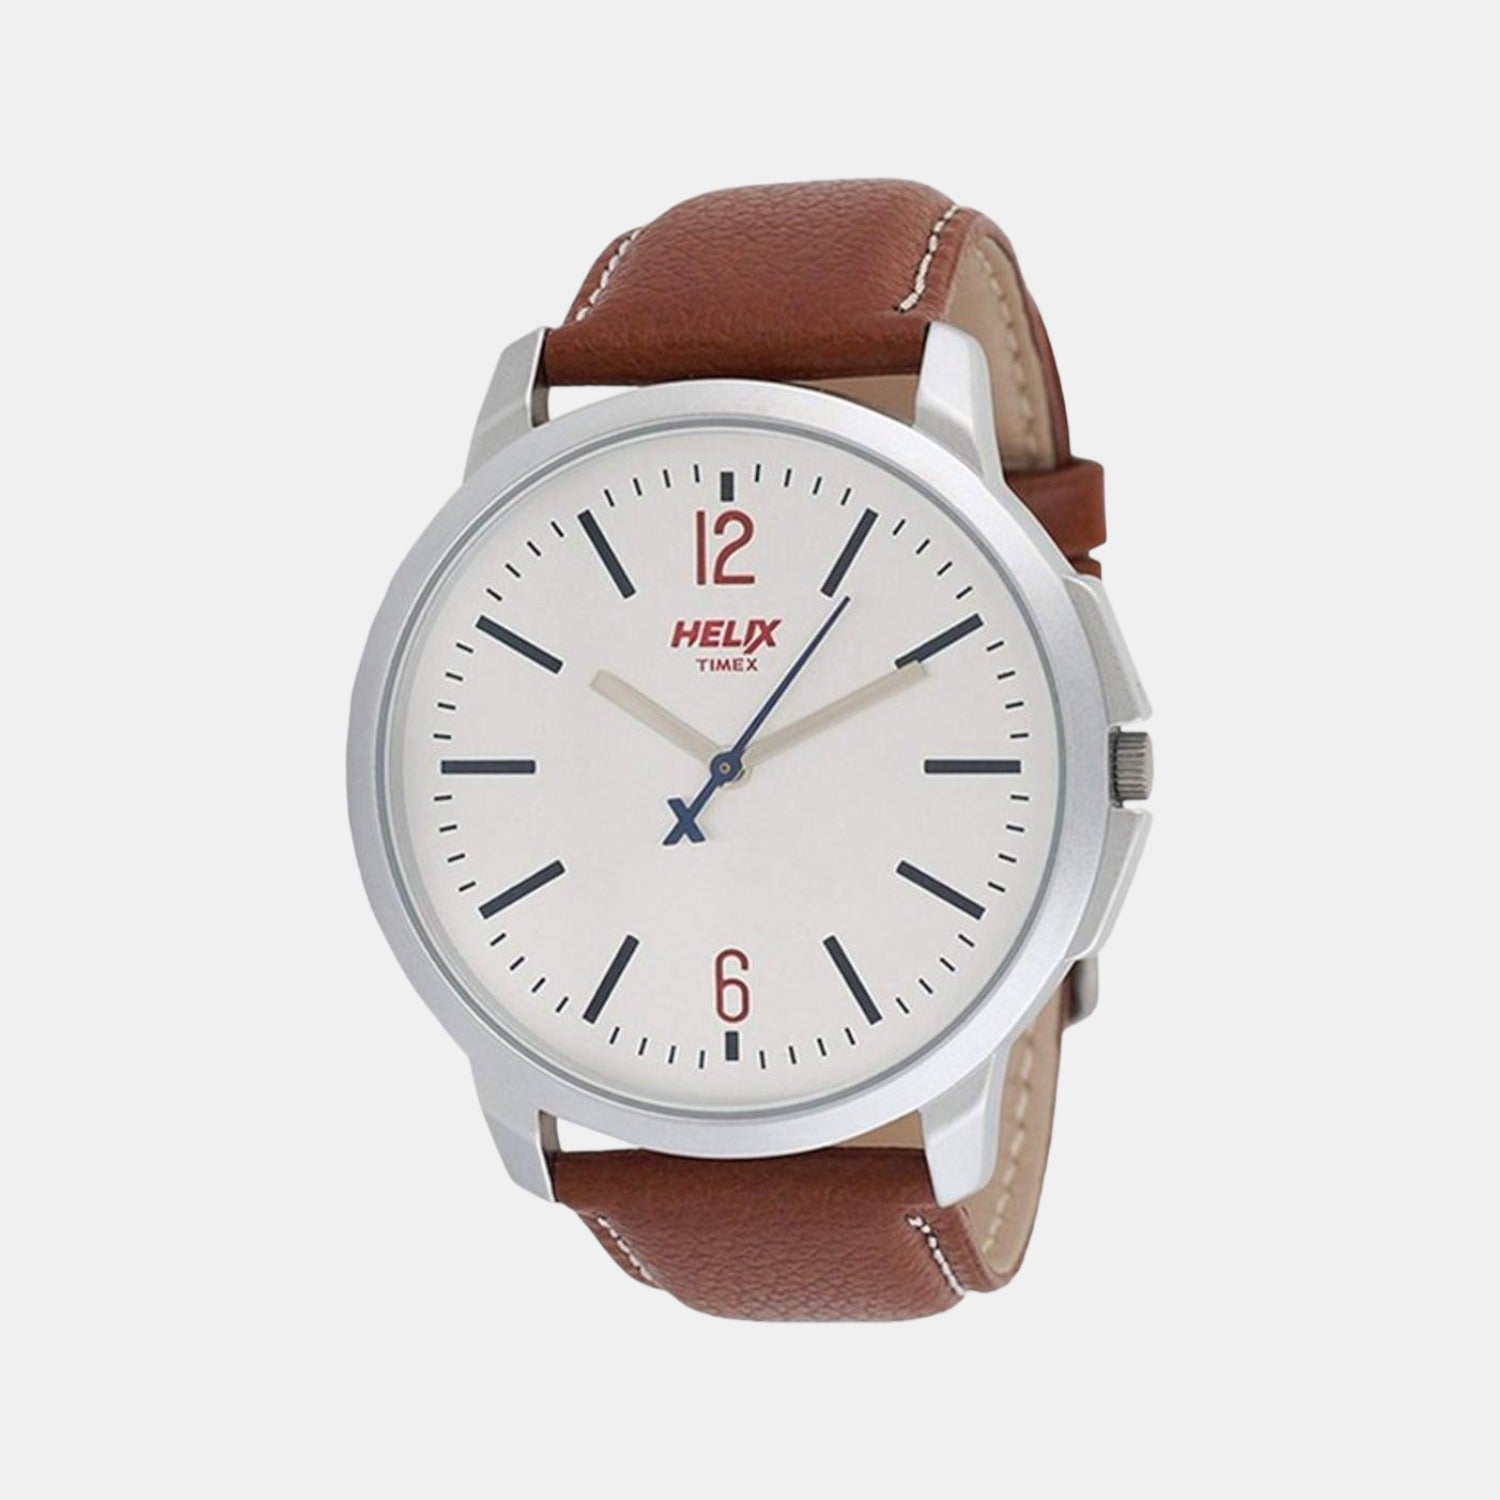 Male Silver Analog Leather Watch TW027HG00